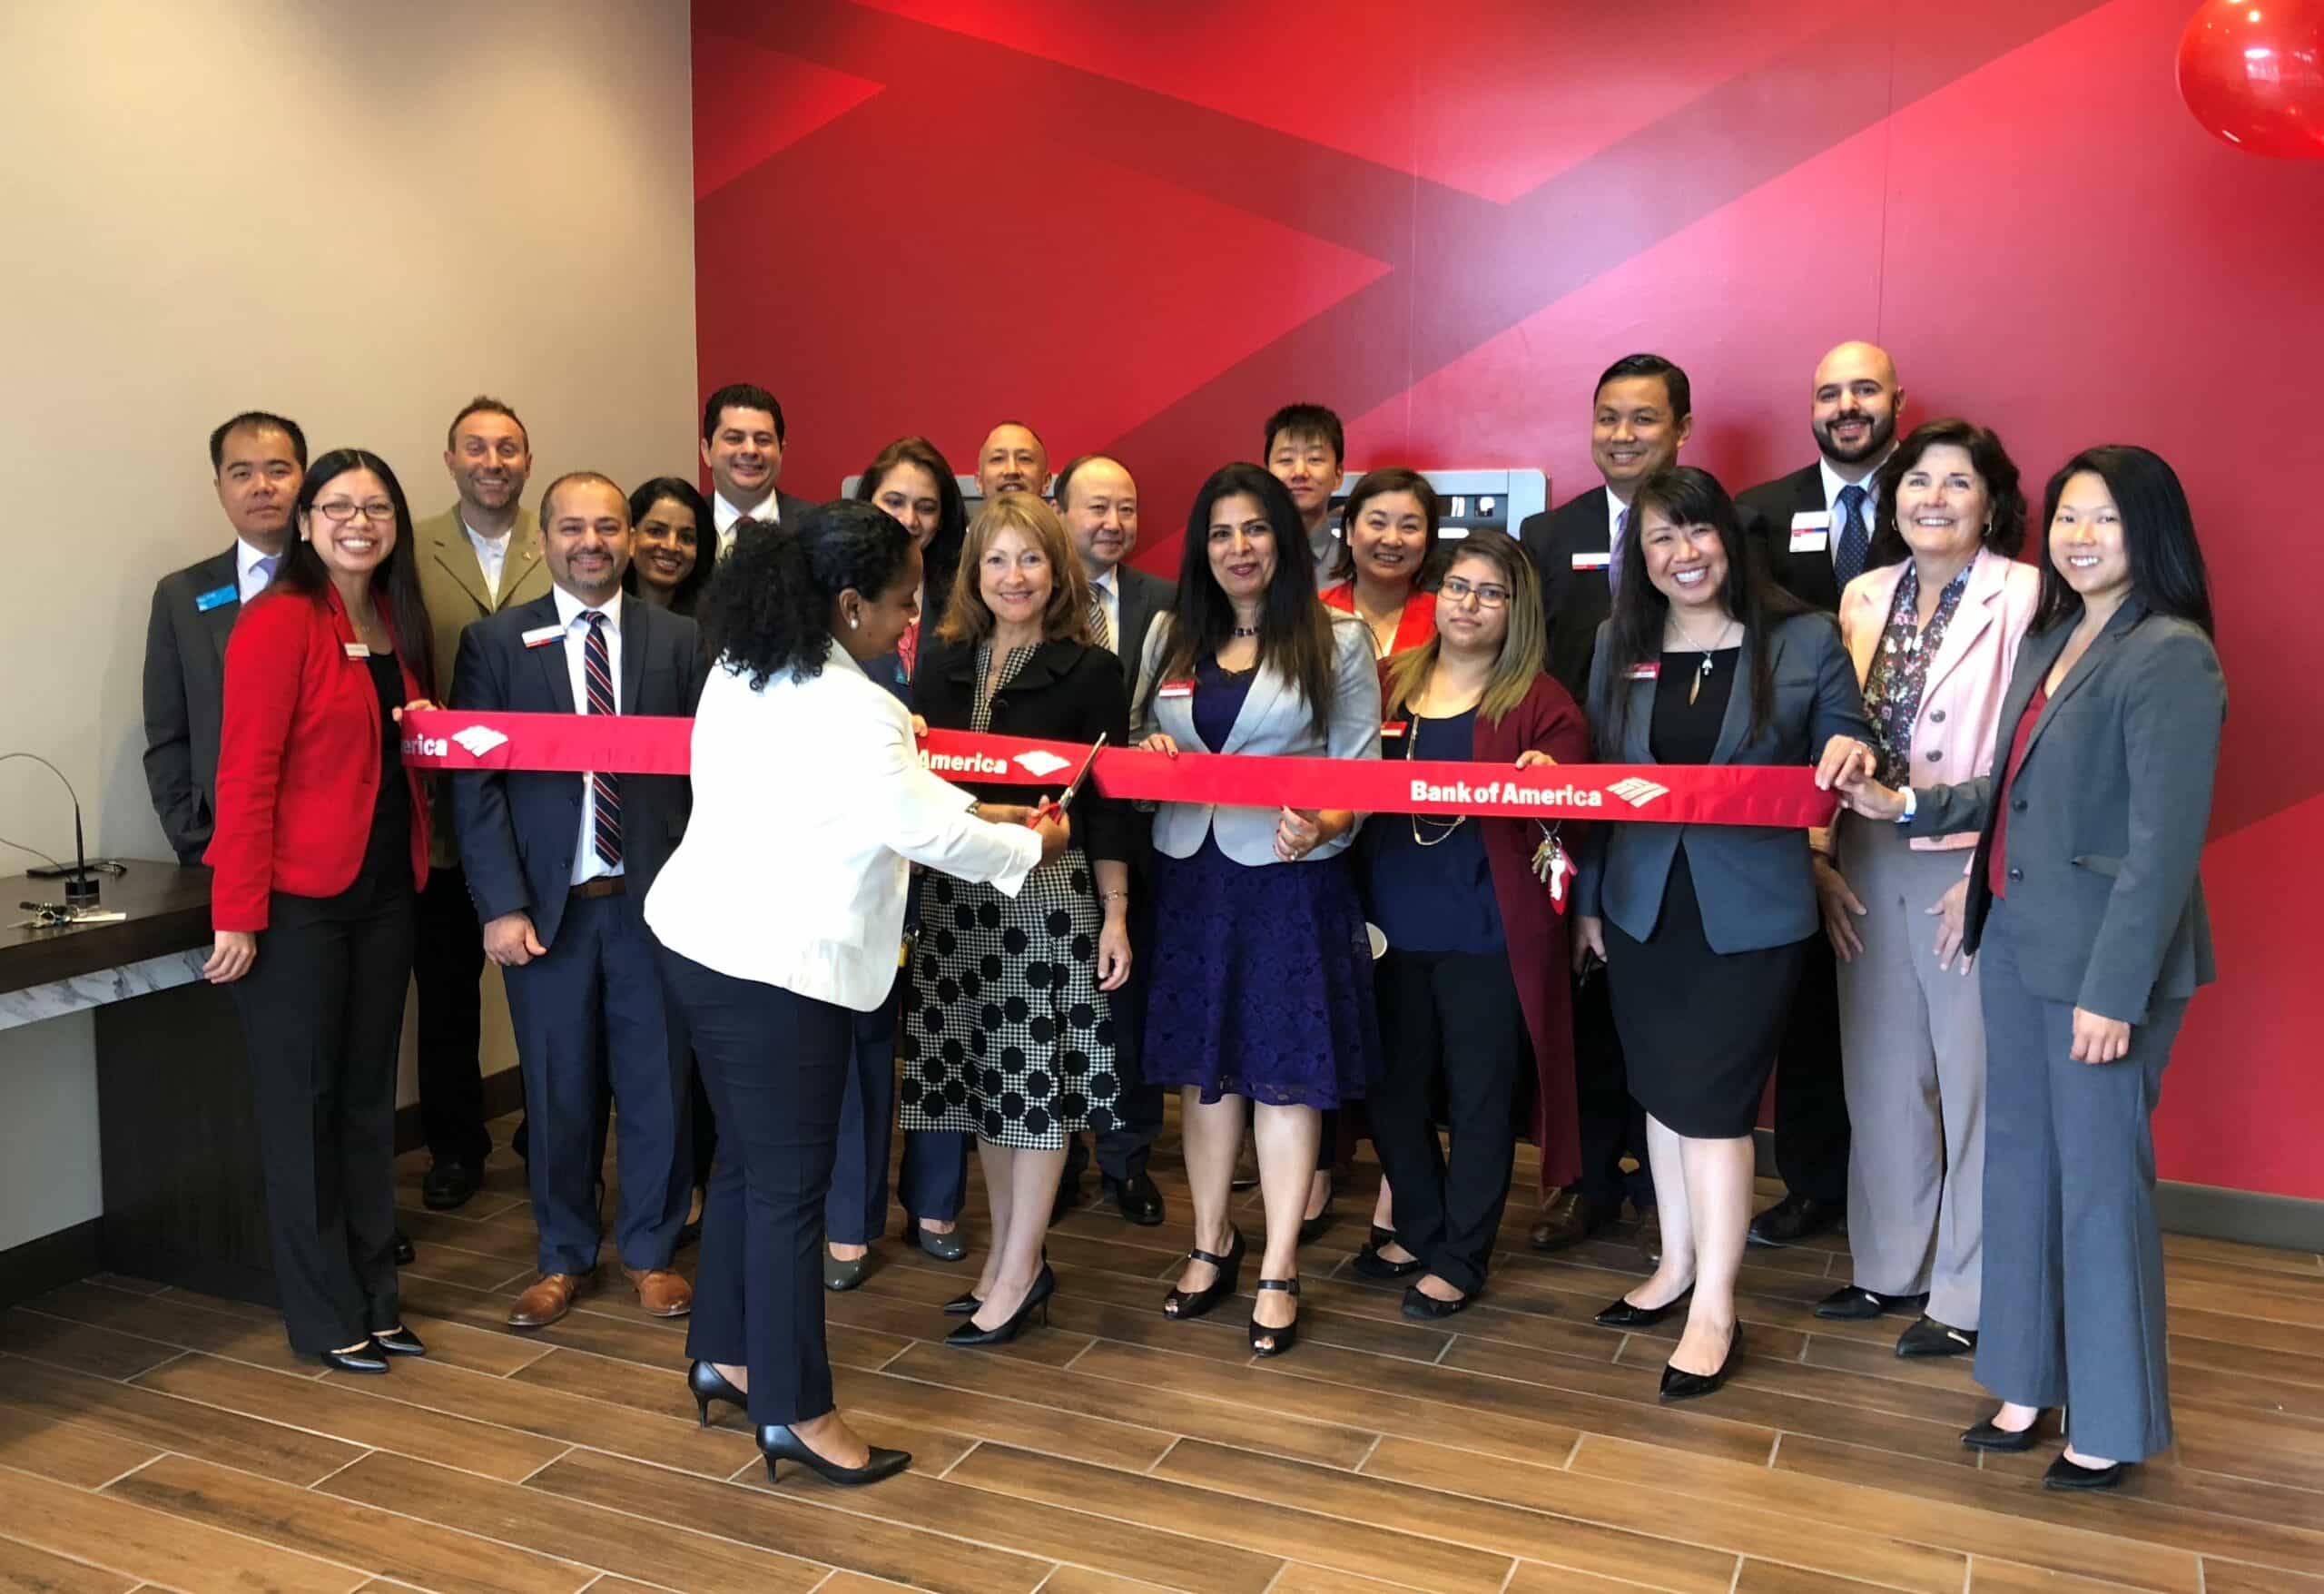 Bank of America's grand opening in Palo Alto, October 4, 2018